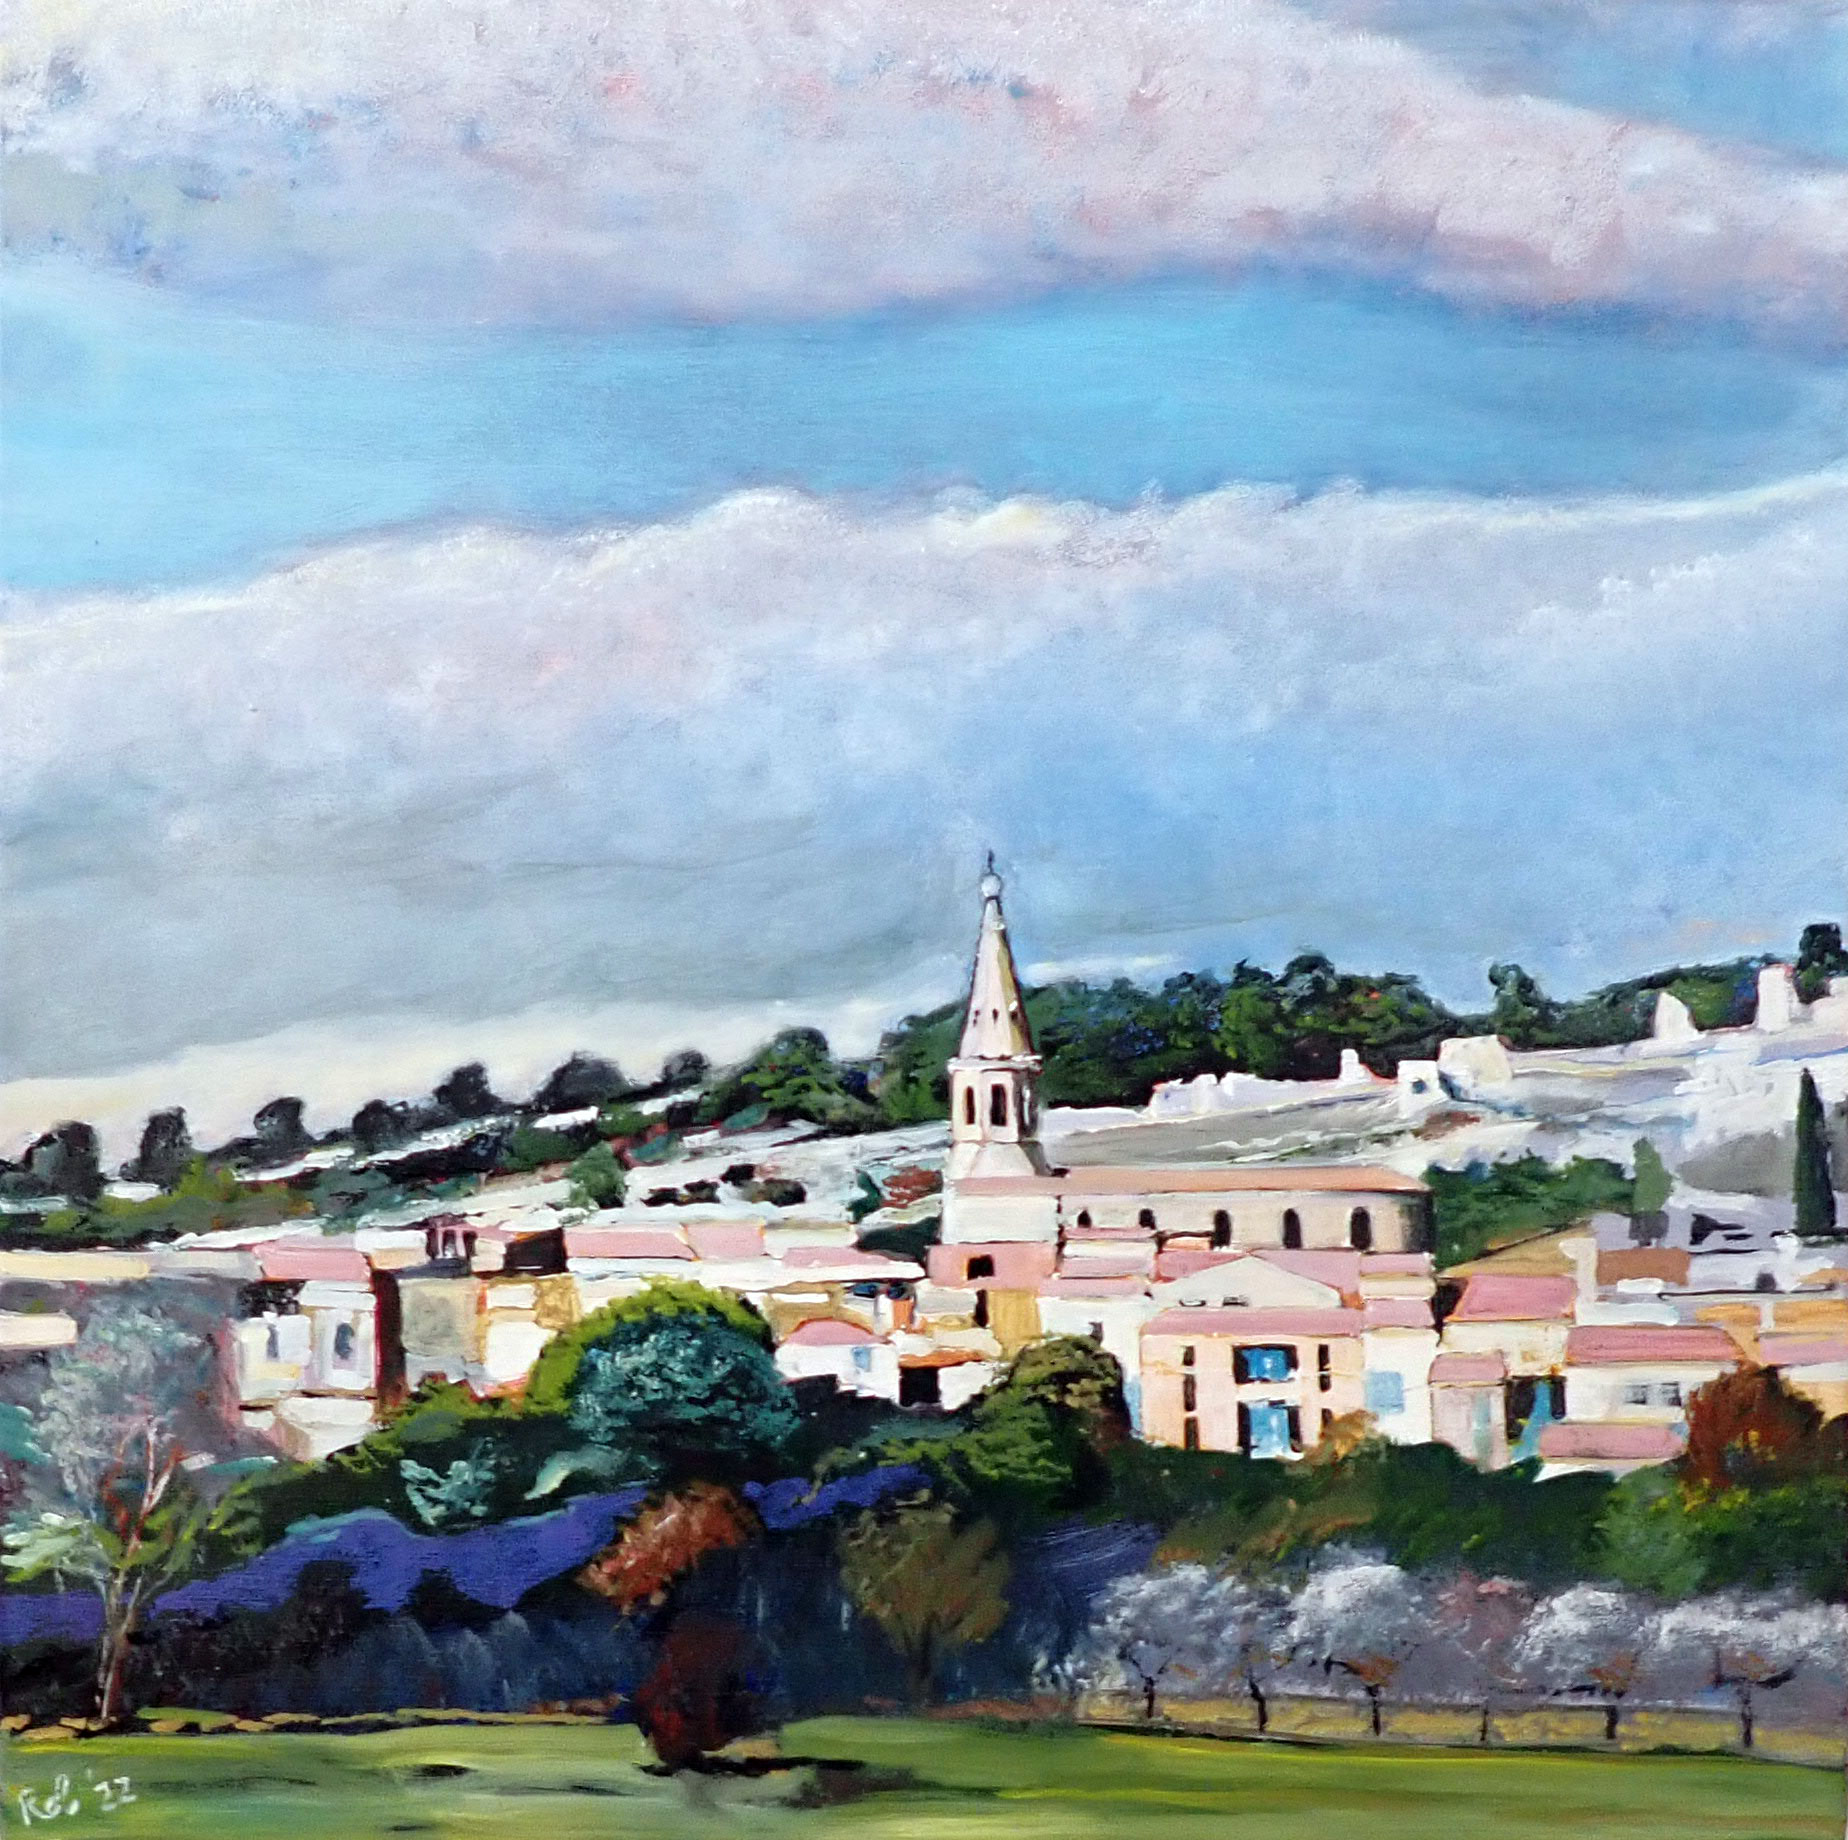 Painting St Saturnin les Apt, printemps 3 by Rob Lieveloo